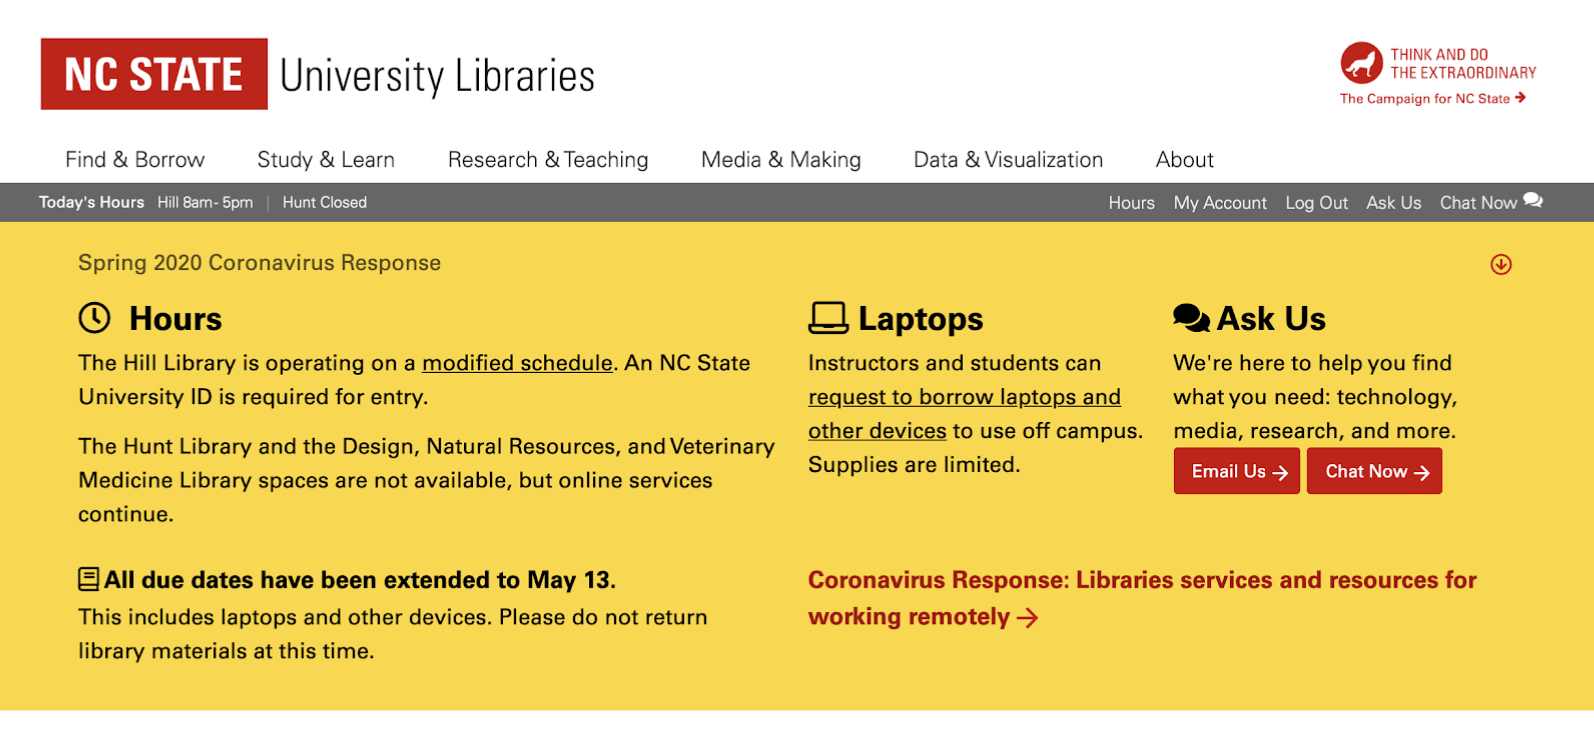 Screenshot of the NC State University Libraries homepage, with a large yellow alert banner that reads Spring 2020 Coronavirus Response' and contains hours changes, due date info, and ways to get help